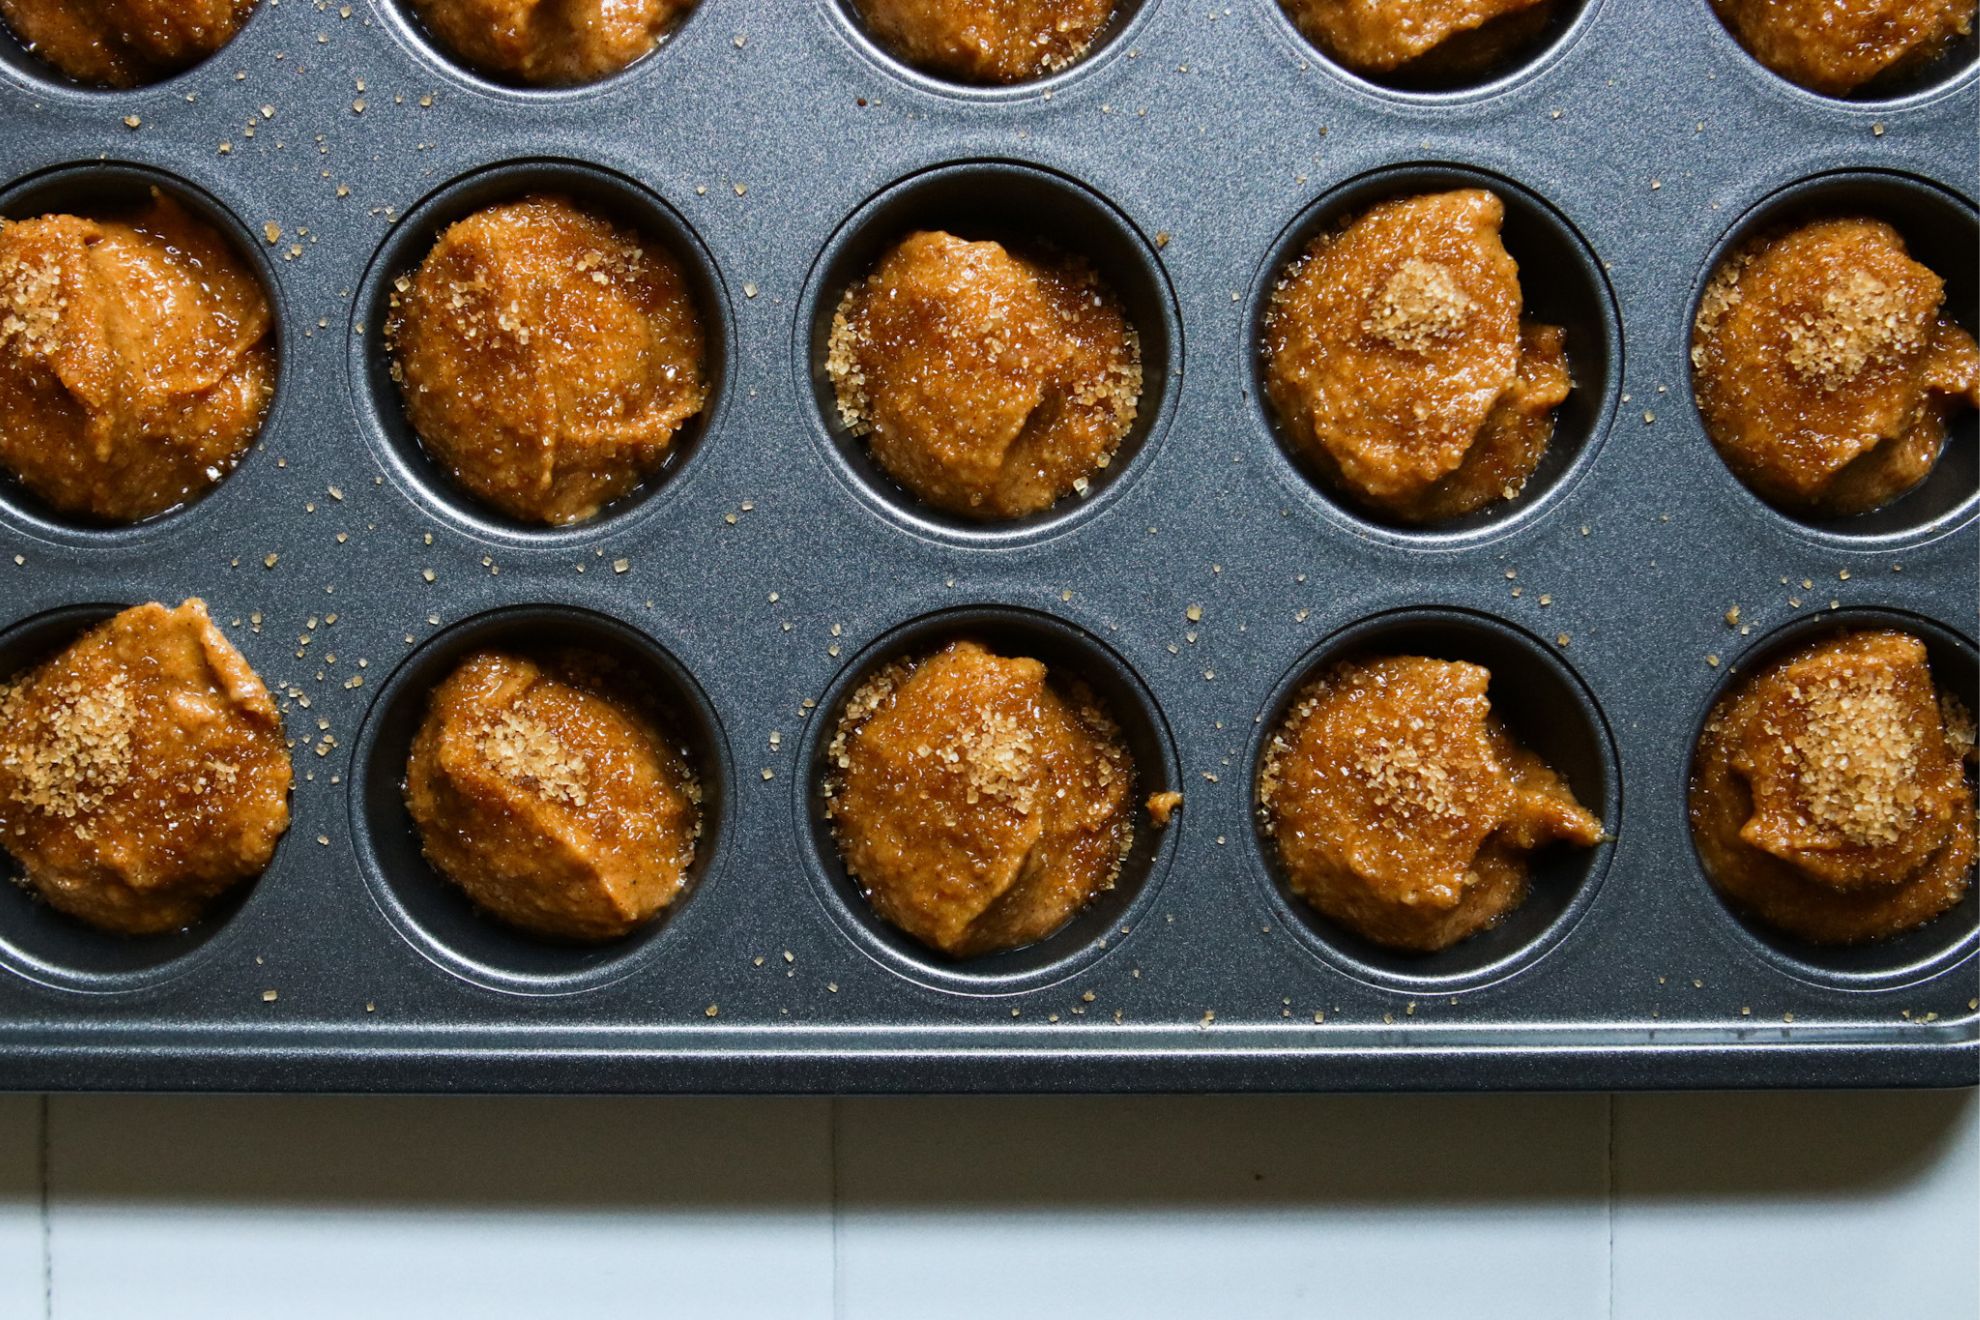 This is an overhead horizontal image focusing on the bottom two rows of a 24 cup mini muffin tin. The tin cups are filled with raw pumpkin muffin batter sprinkled with a light brown sugar. The tin sits on a white square tile surface.